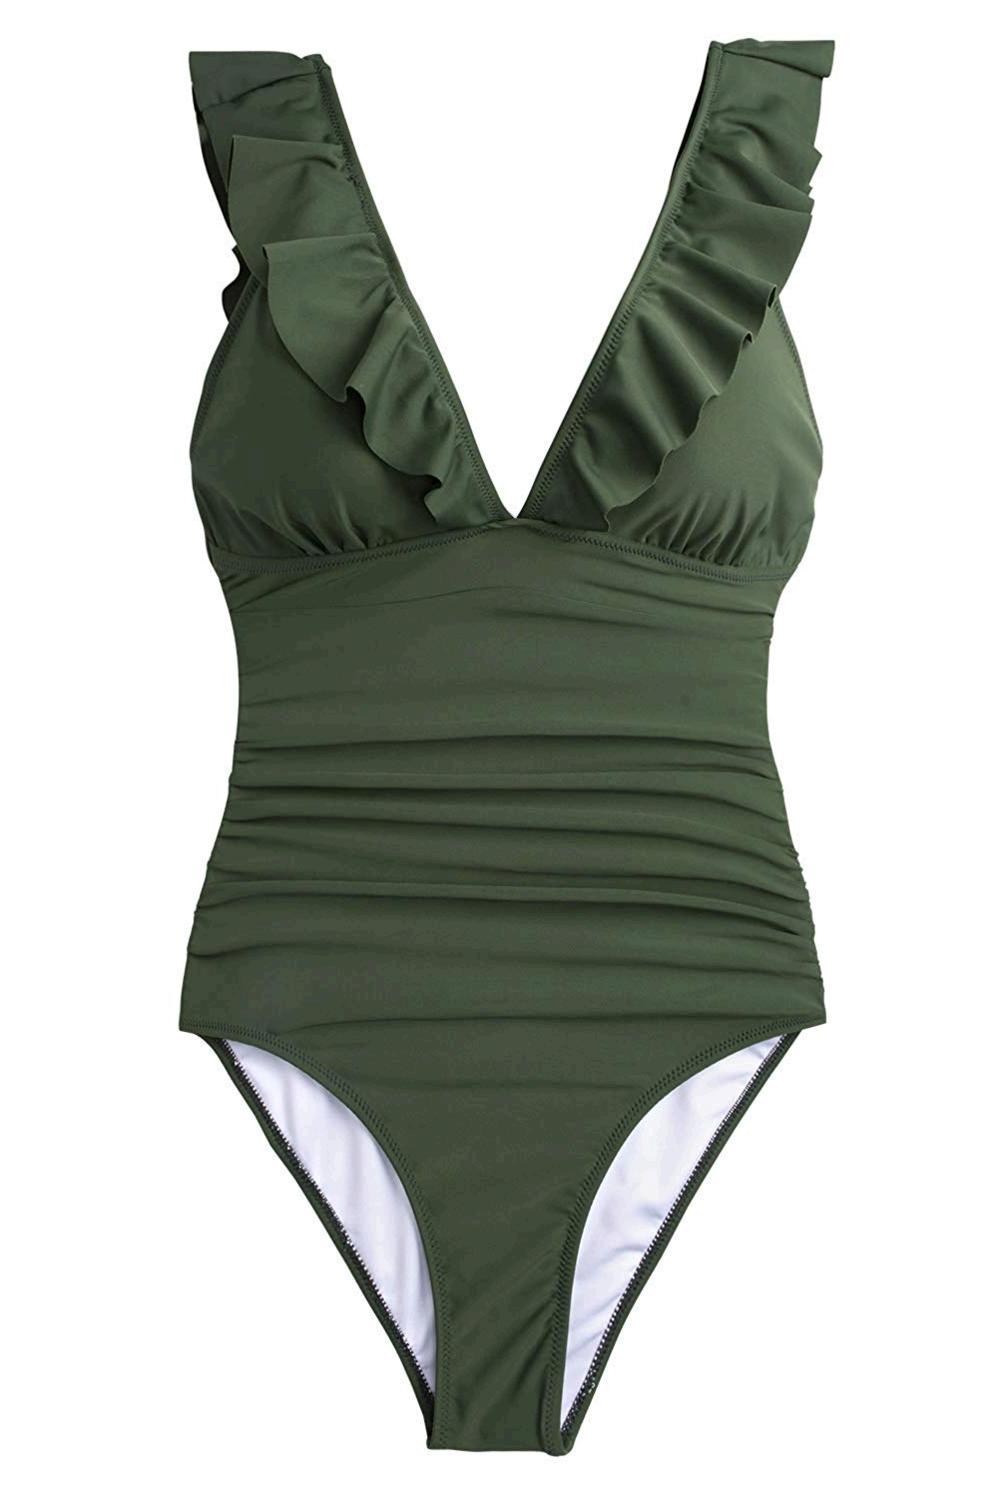 CUPSHE Women's V Neck One Piece Swimsuit Ruffled Lace Up, Green, Size